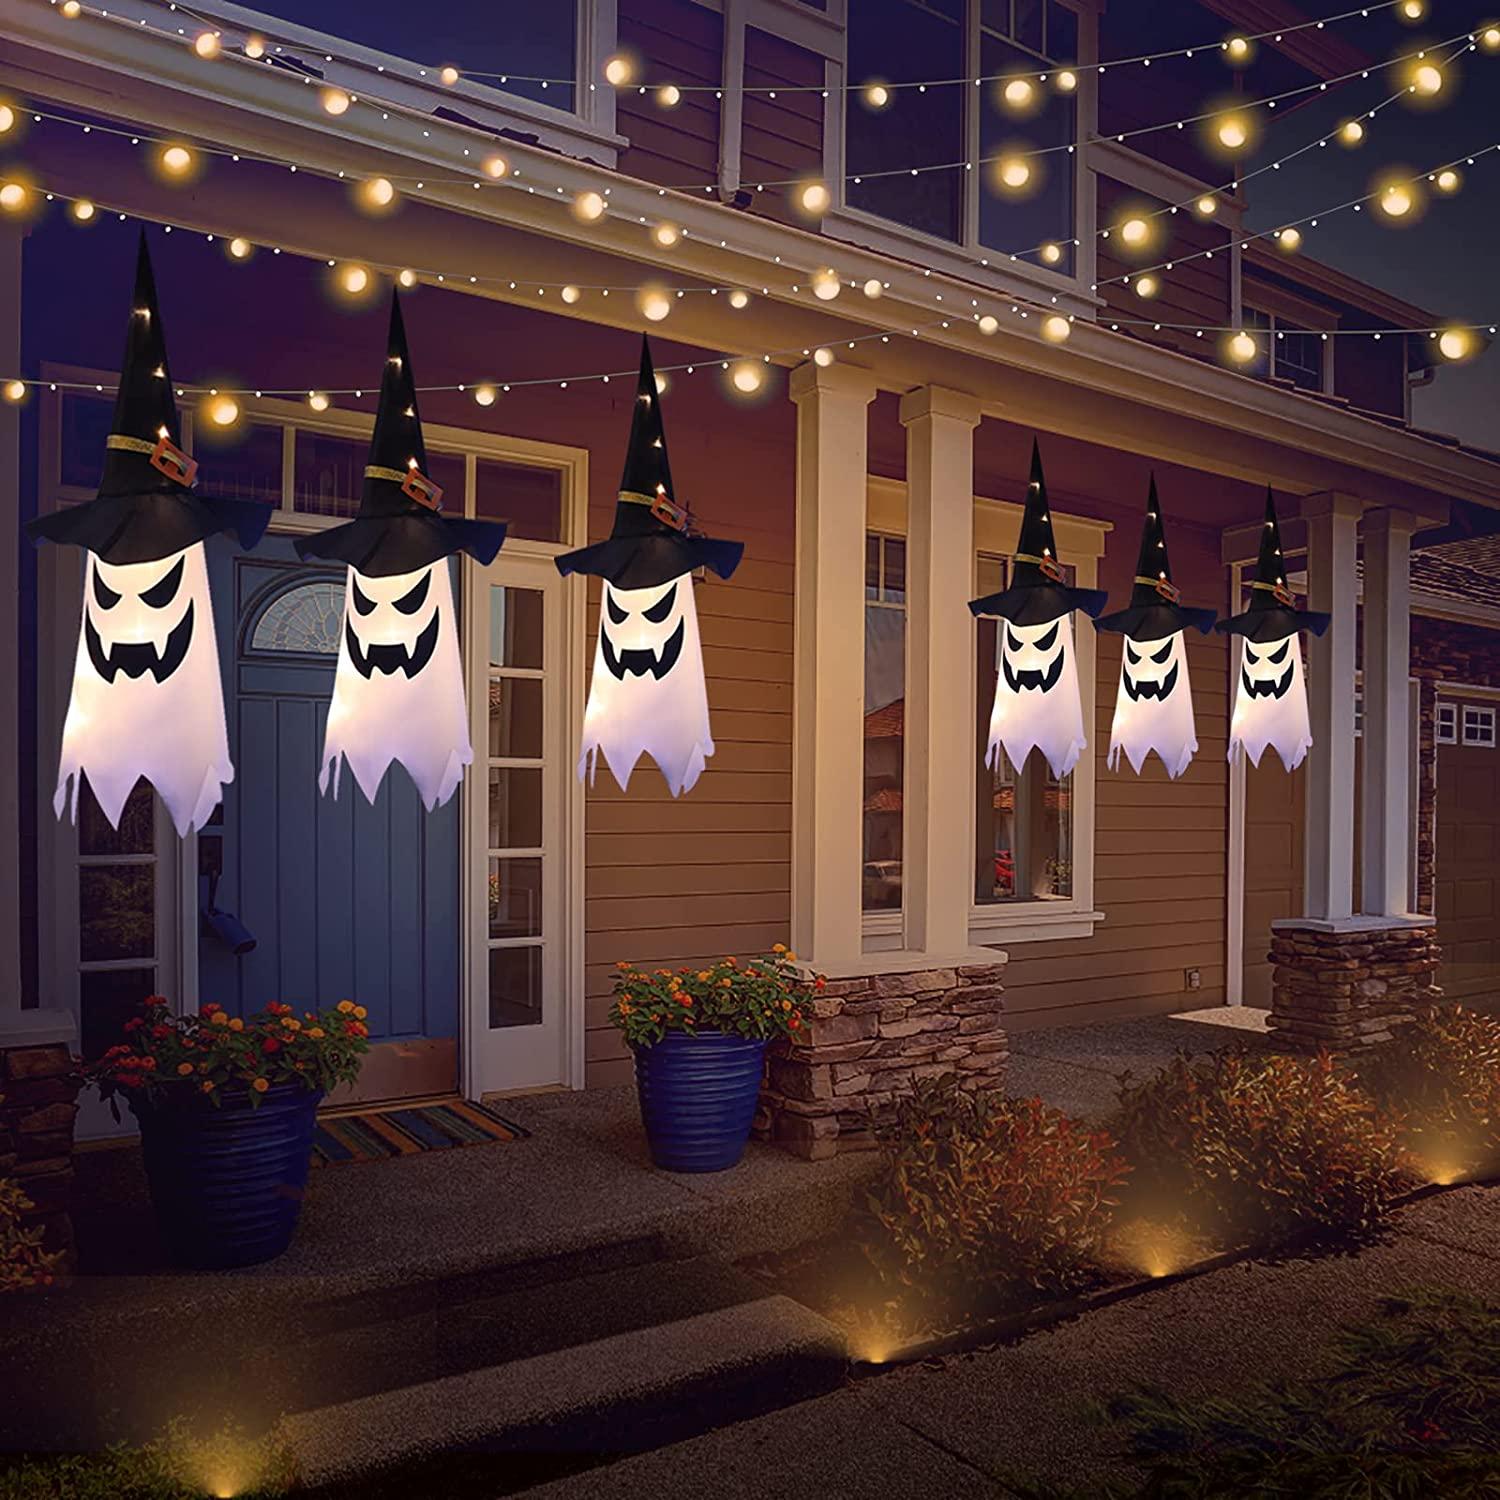 3pcs Halloween Decorations Outdoor Decor Hanging Lighted Glowing Ghost Witch Hats - If you say i do